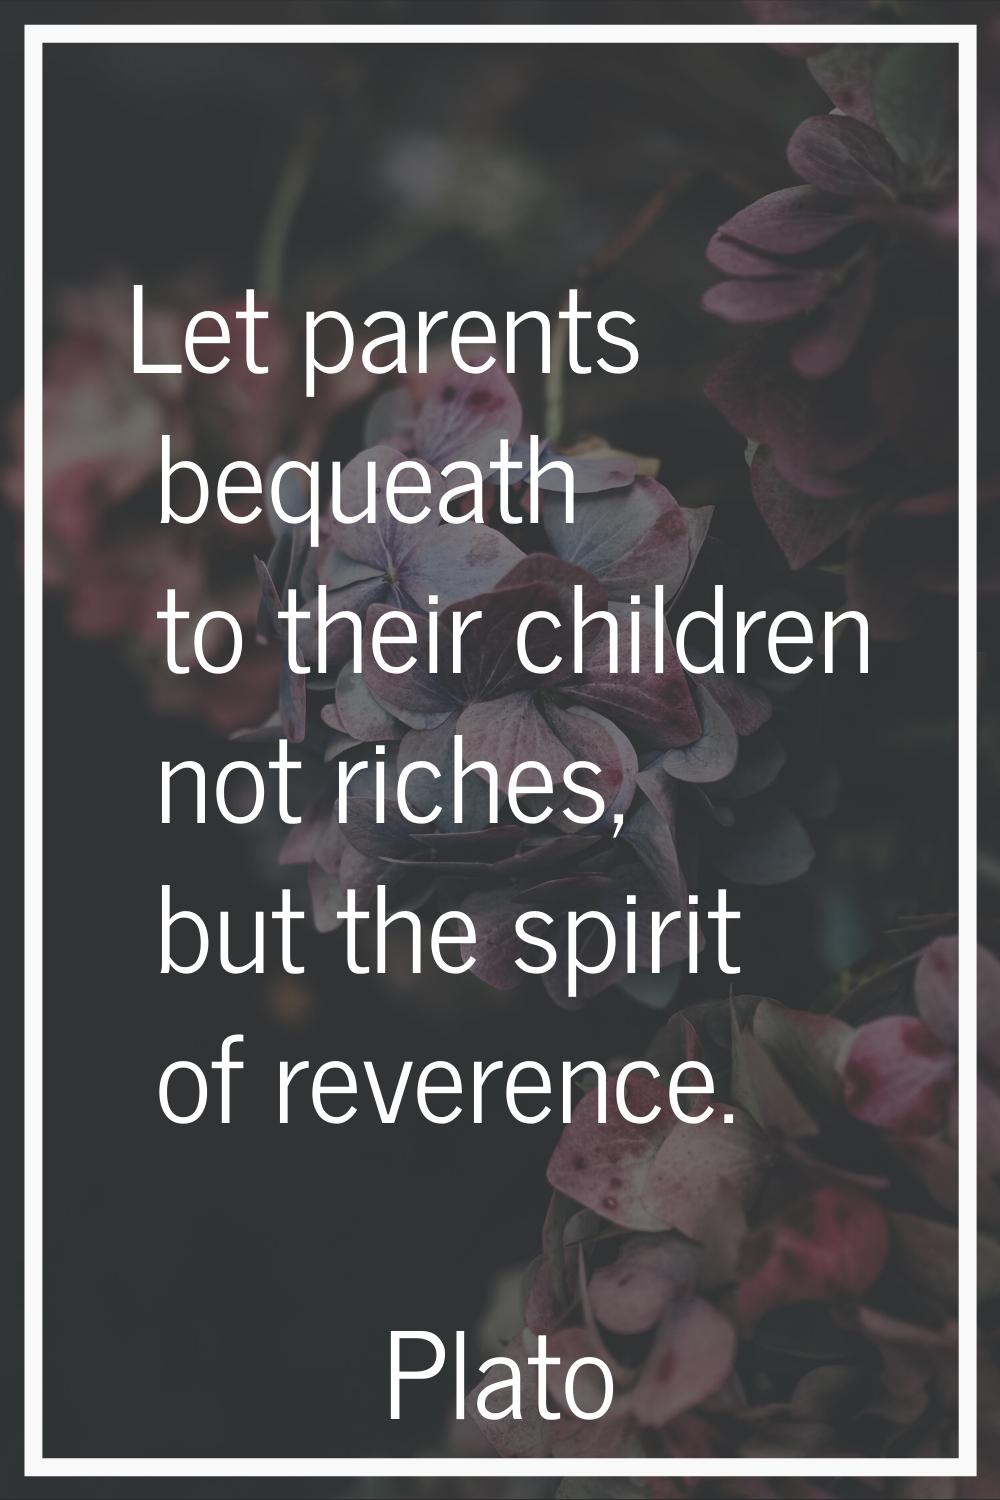 Let parents bequeath to their children not riches, but the spirit of reverence.